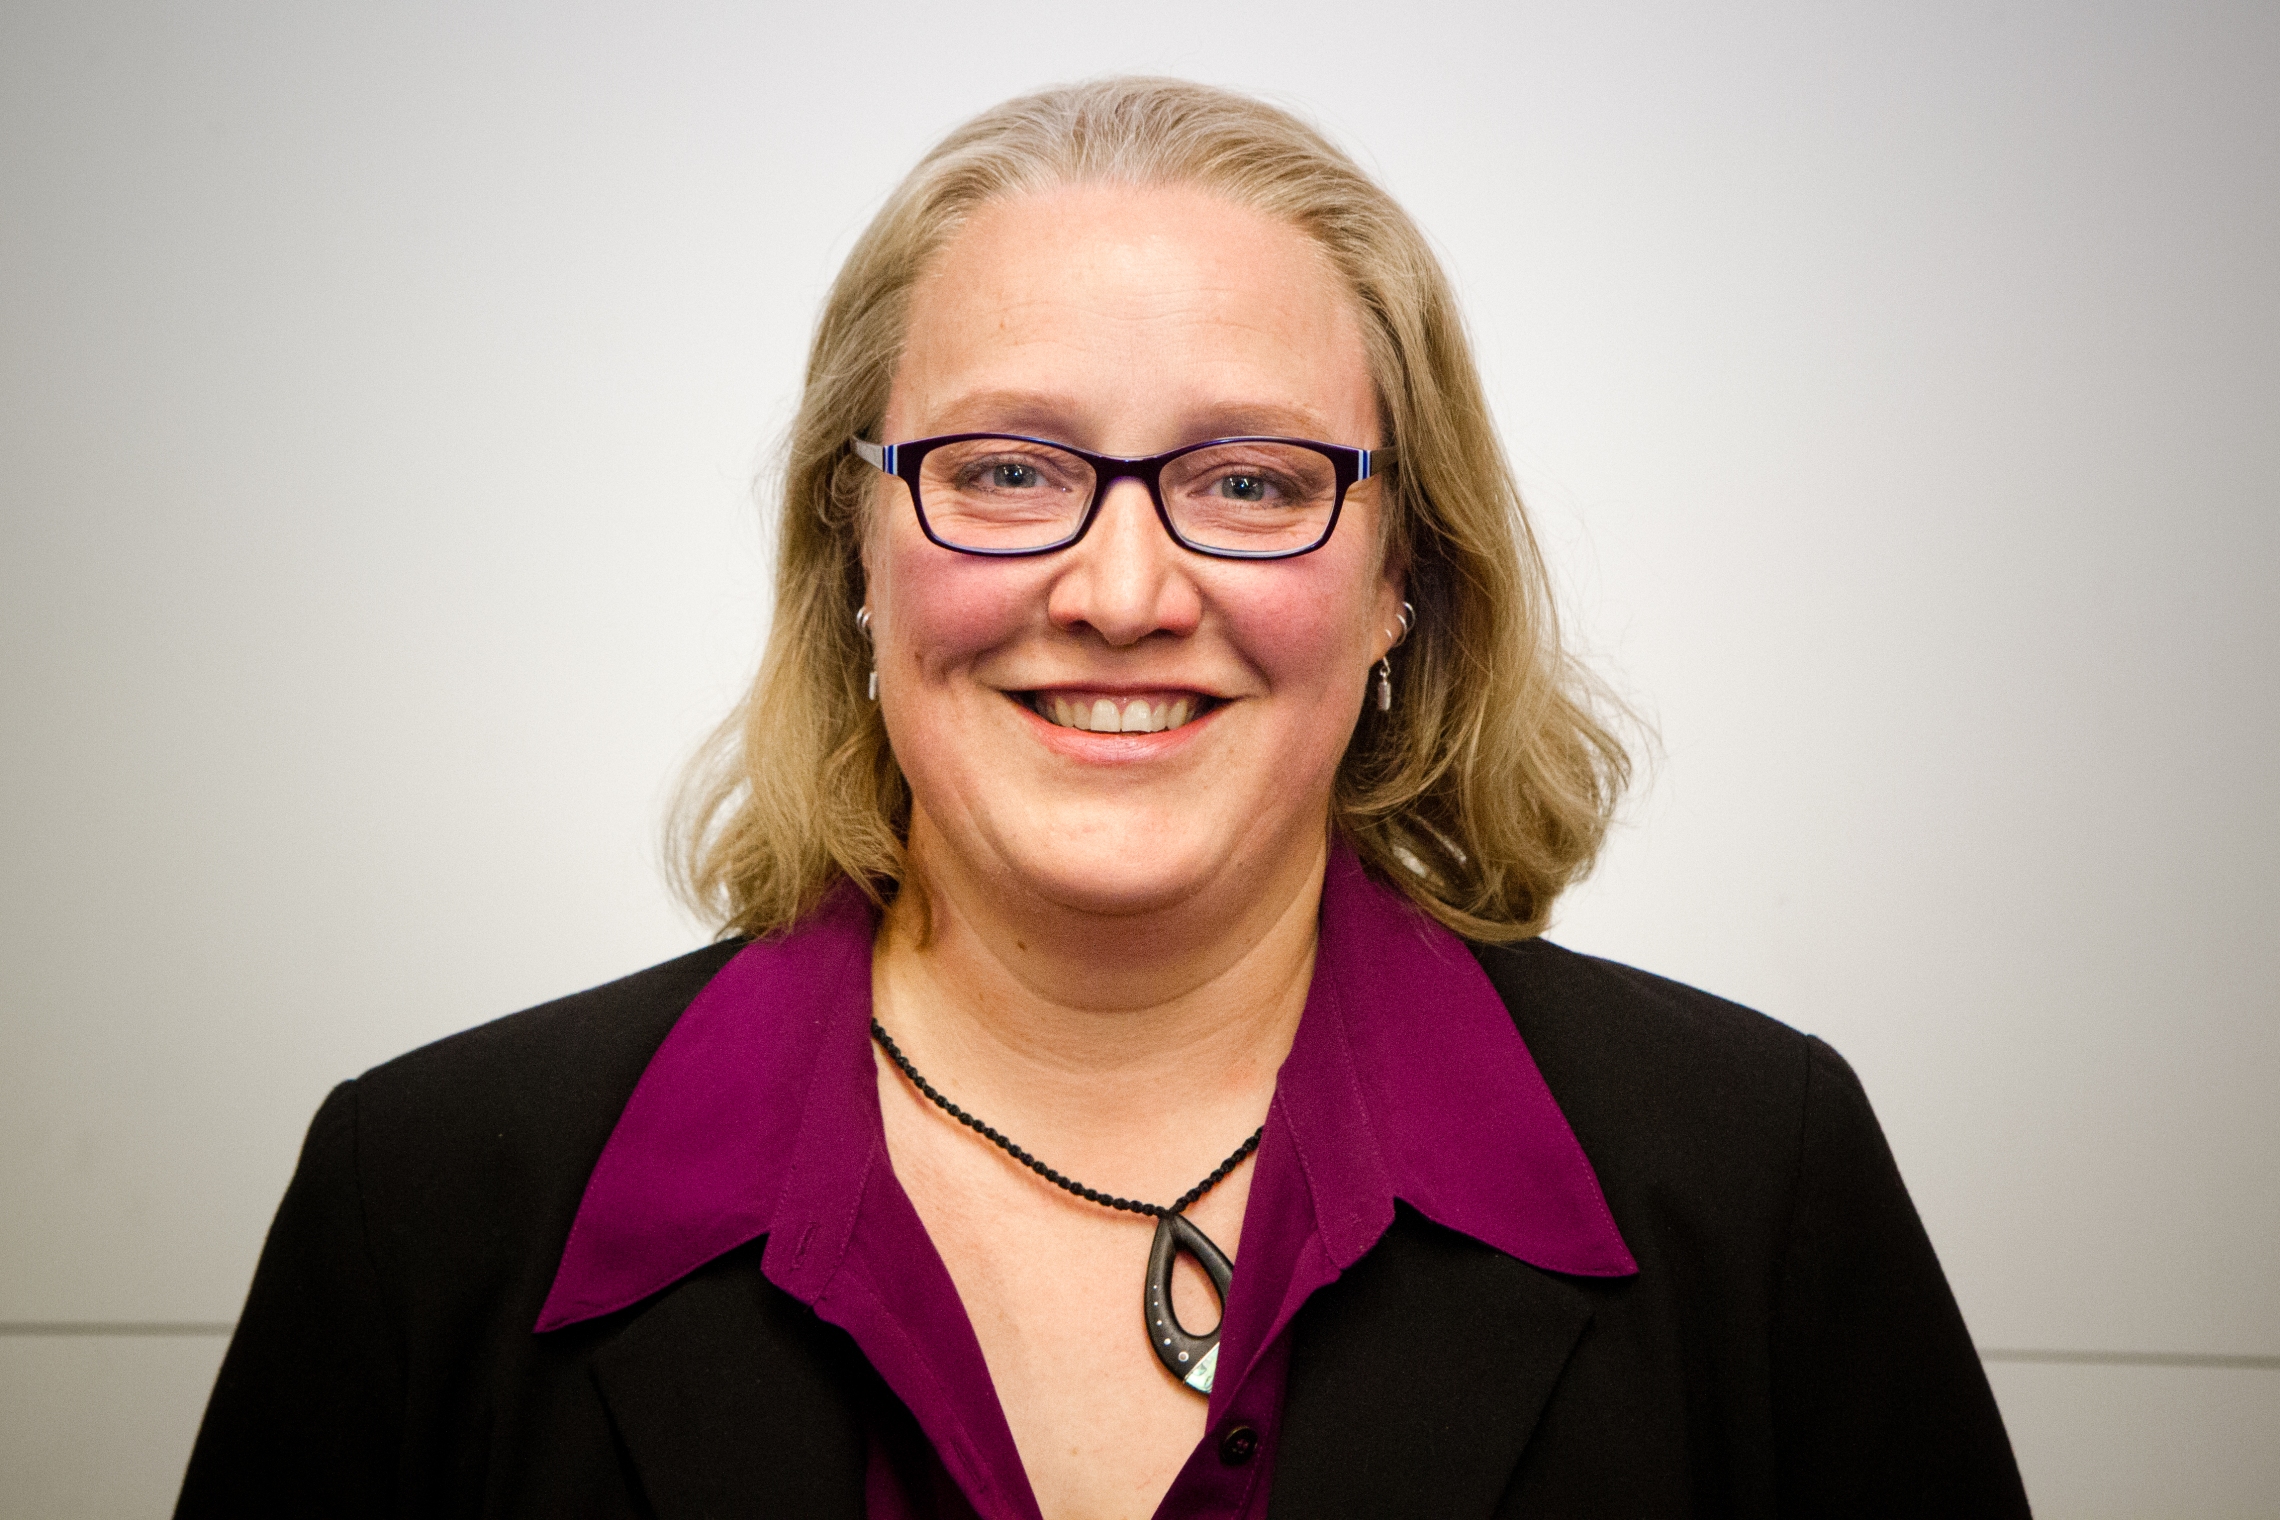 Headshot of Dr Carolyn Lundquist, smiling in business casual